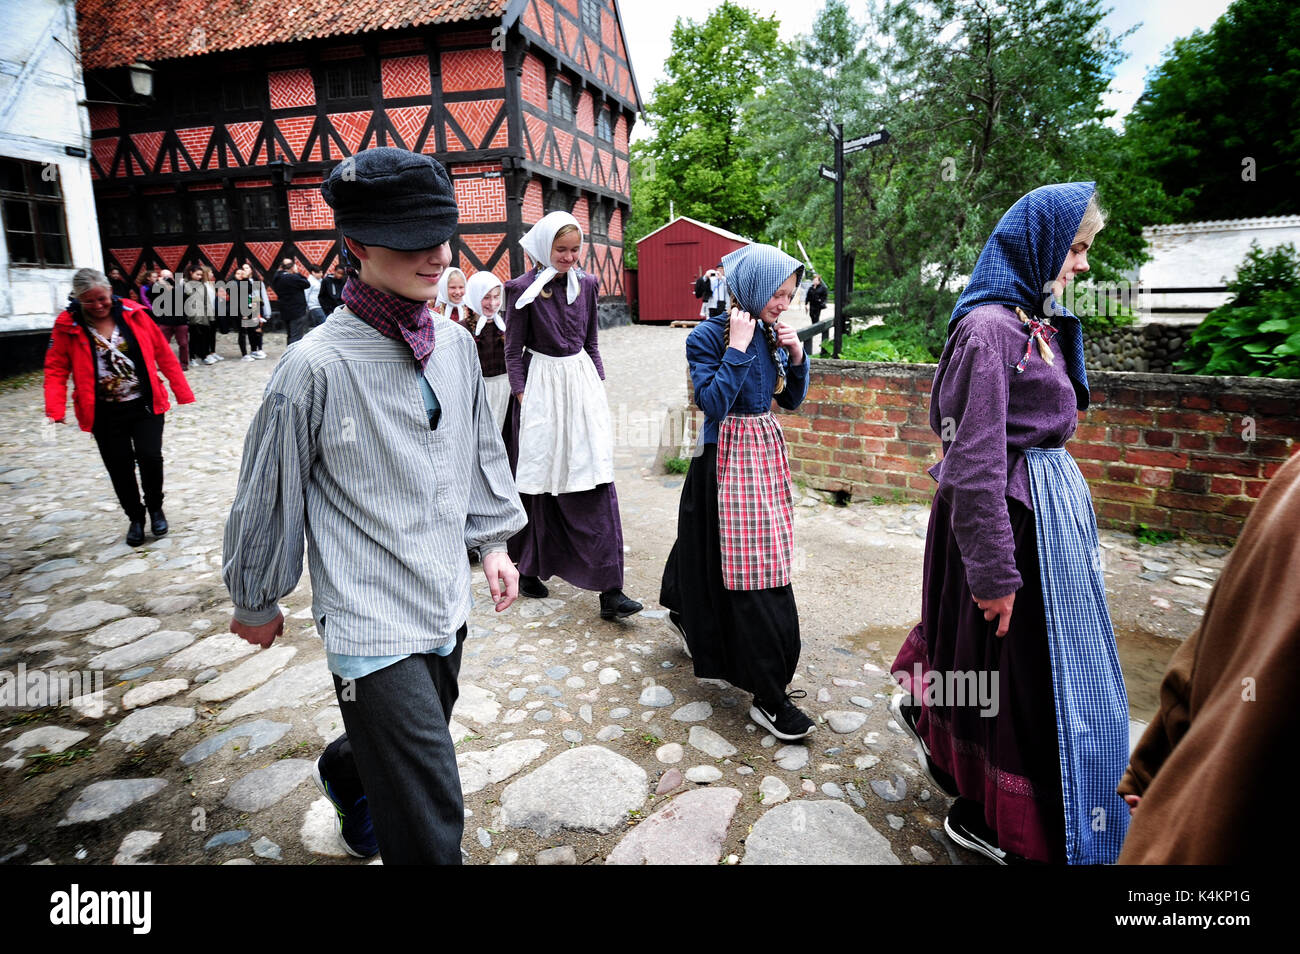 People in period costumes at Den Gamle By (The Old Town), an open-air folk museum known in Aarhus, Denmark. Stock Photo